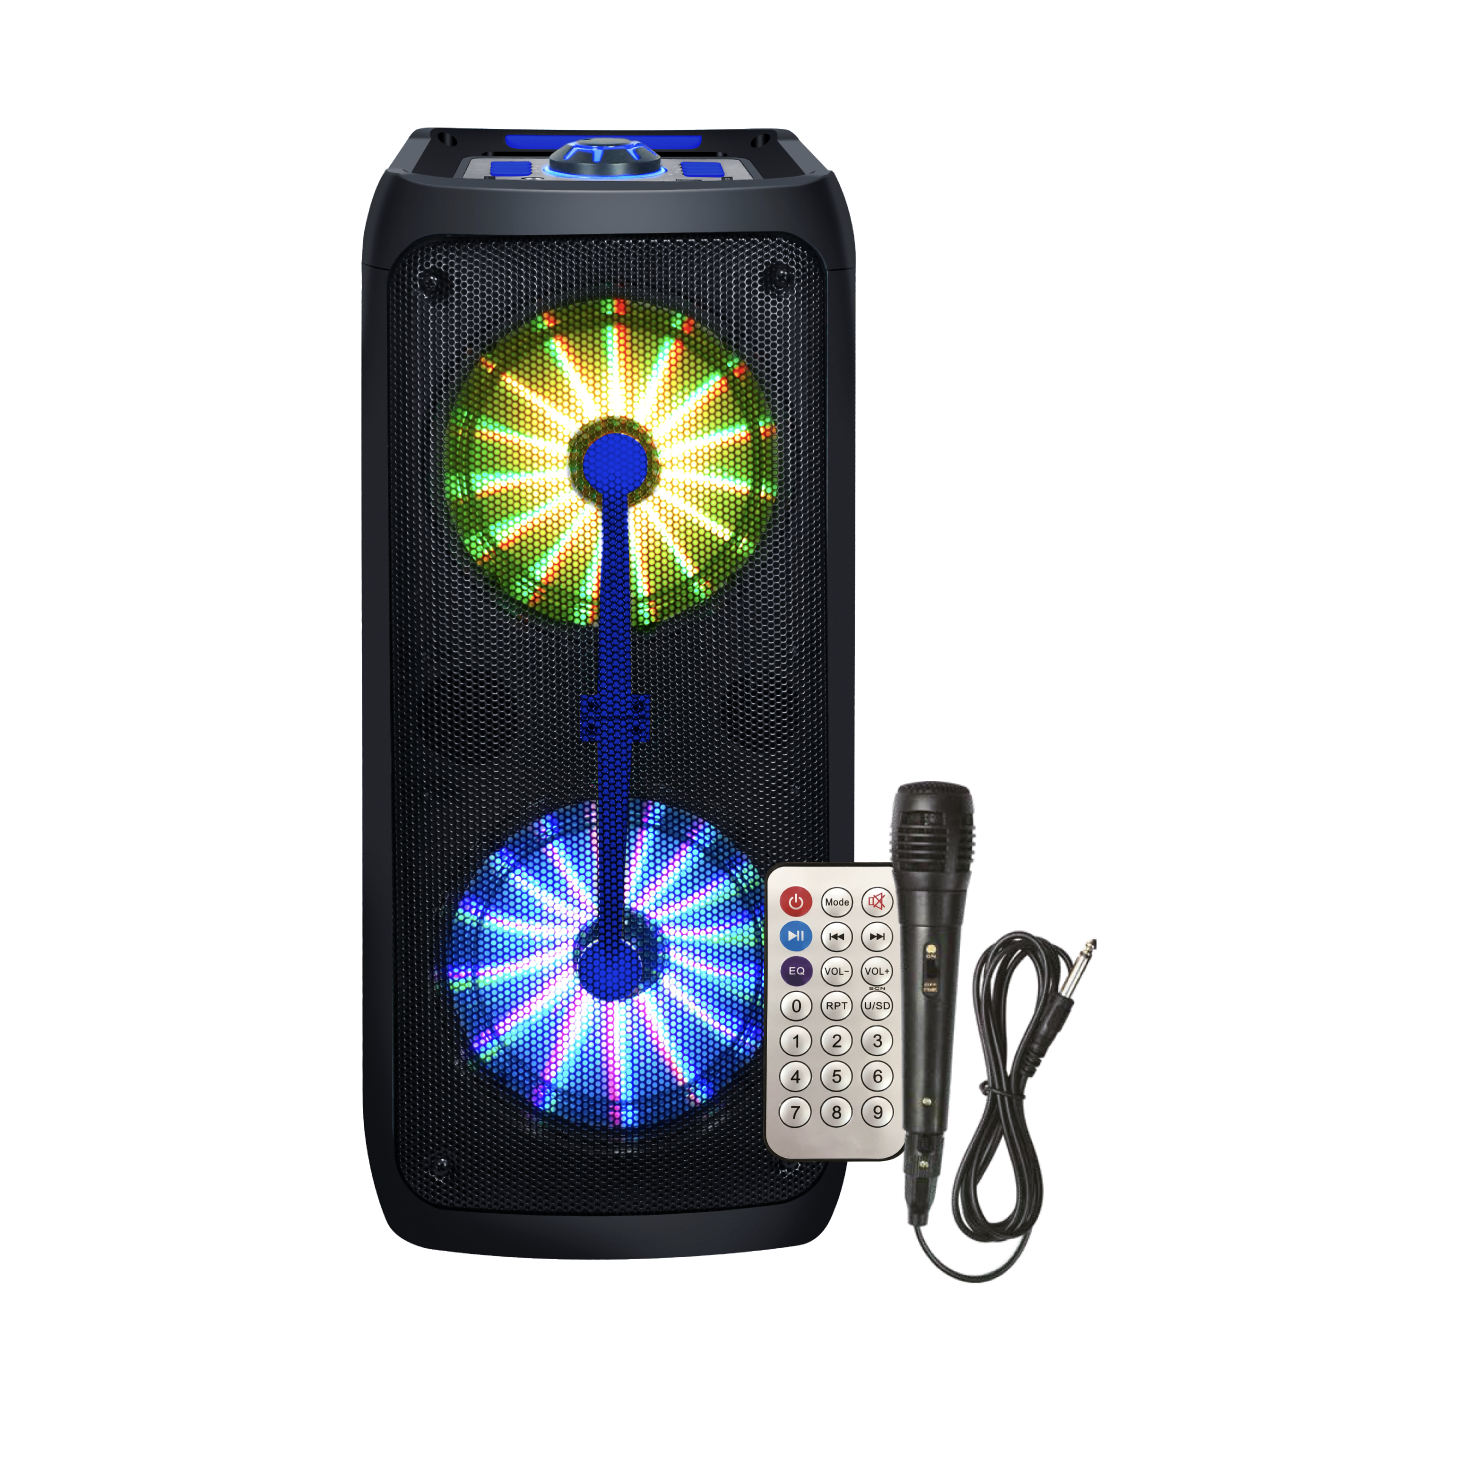 Fire Flame 6 | Karaoke Party Speaker | Full Motion LED / Wired Mic / Remote